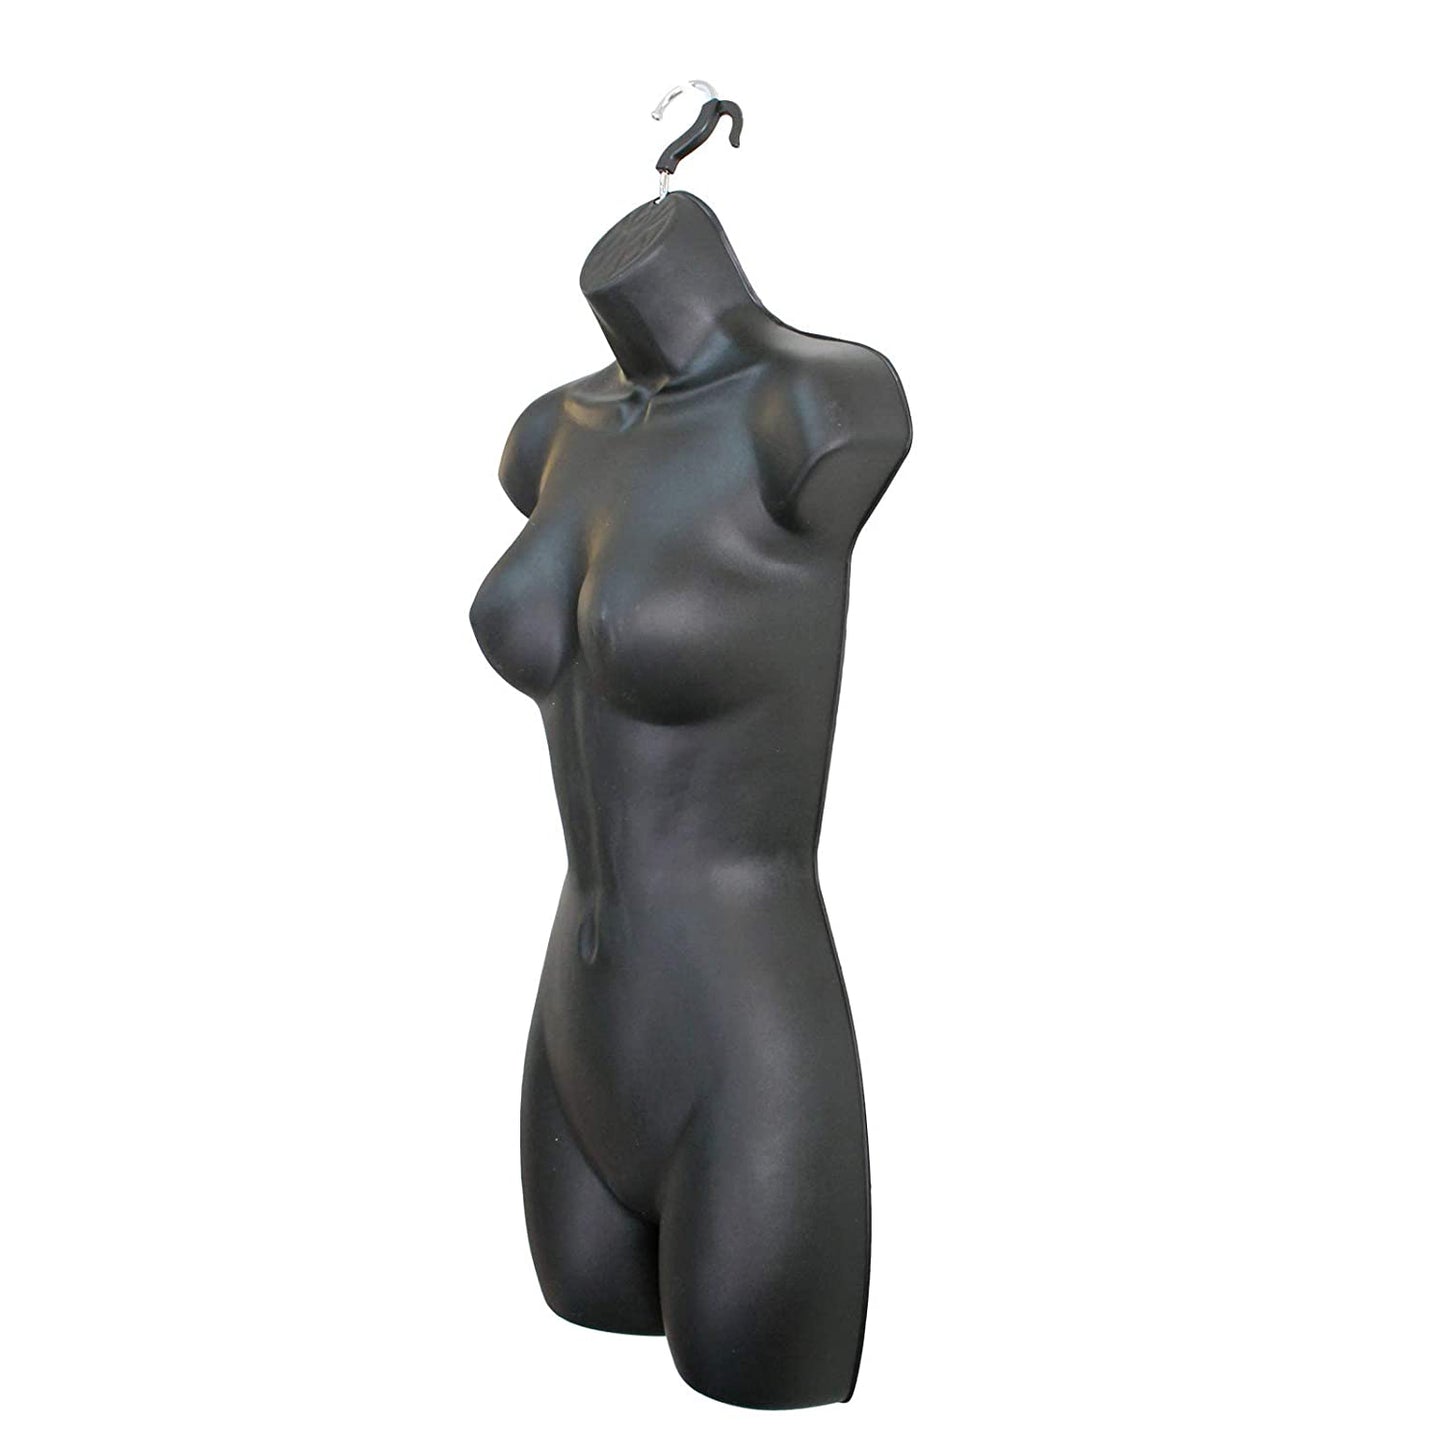 Used 3/4 Female Mannequin Torso- Hollow Back. 2 each